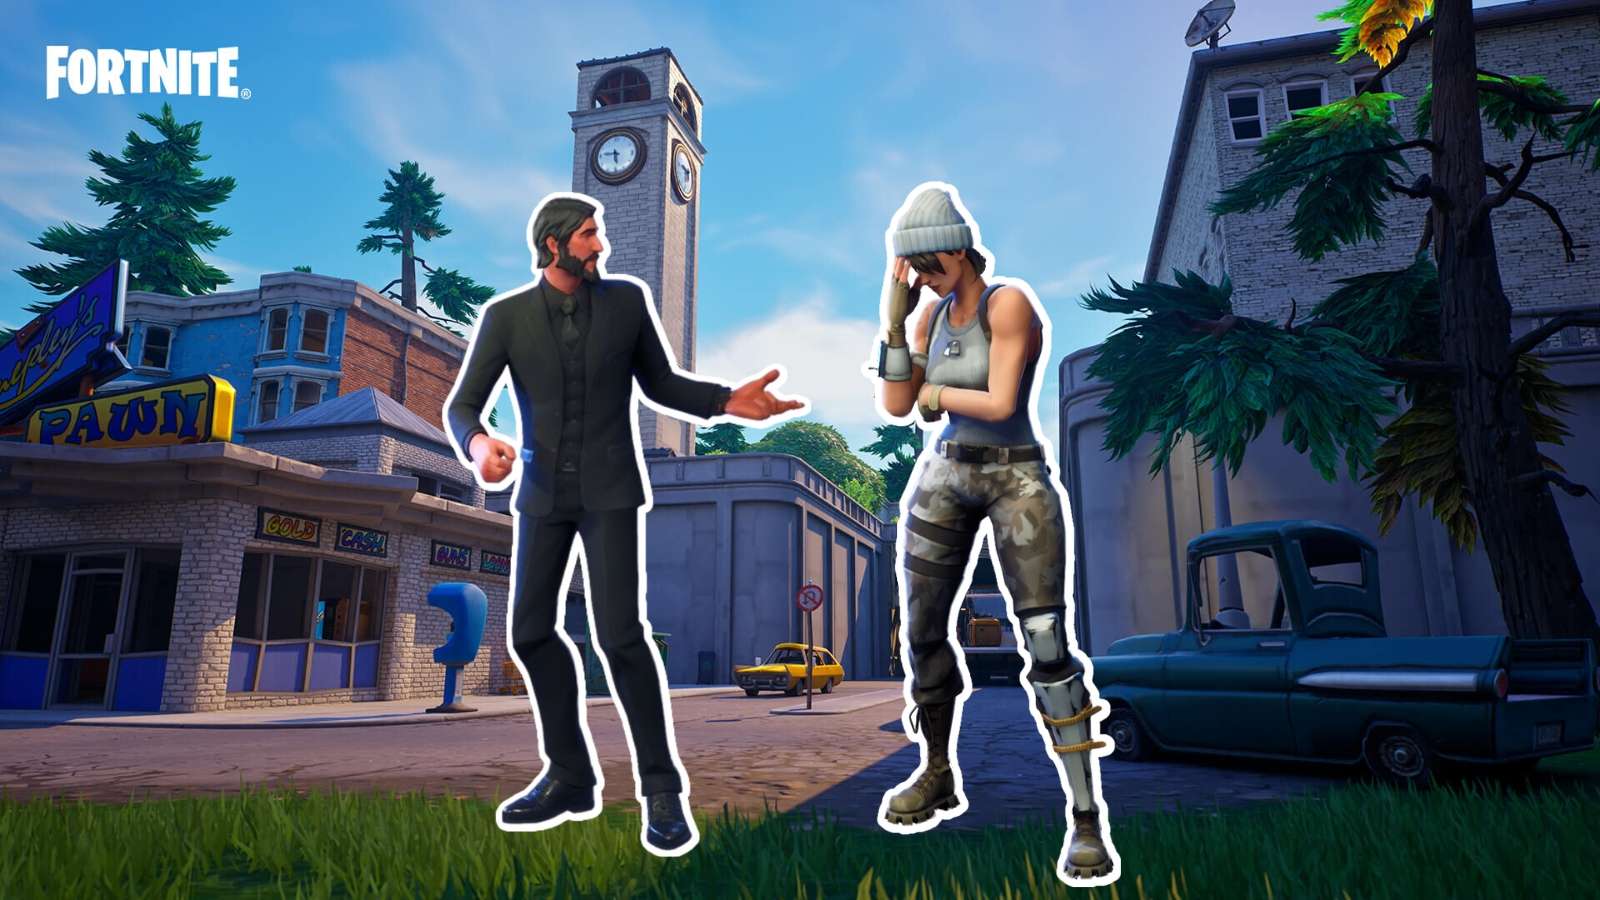 Fortnite players confused and facepalm emote